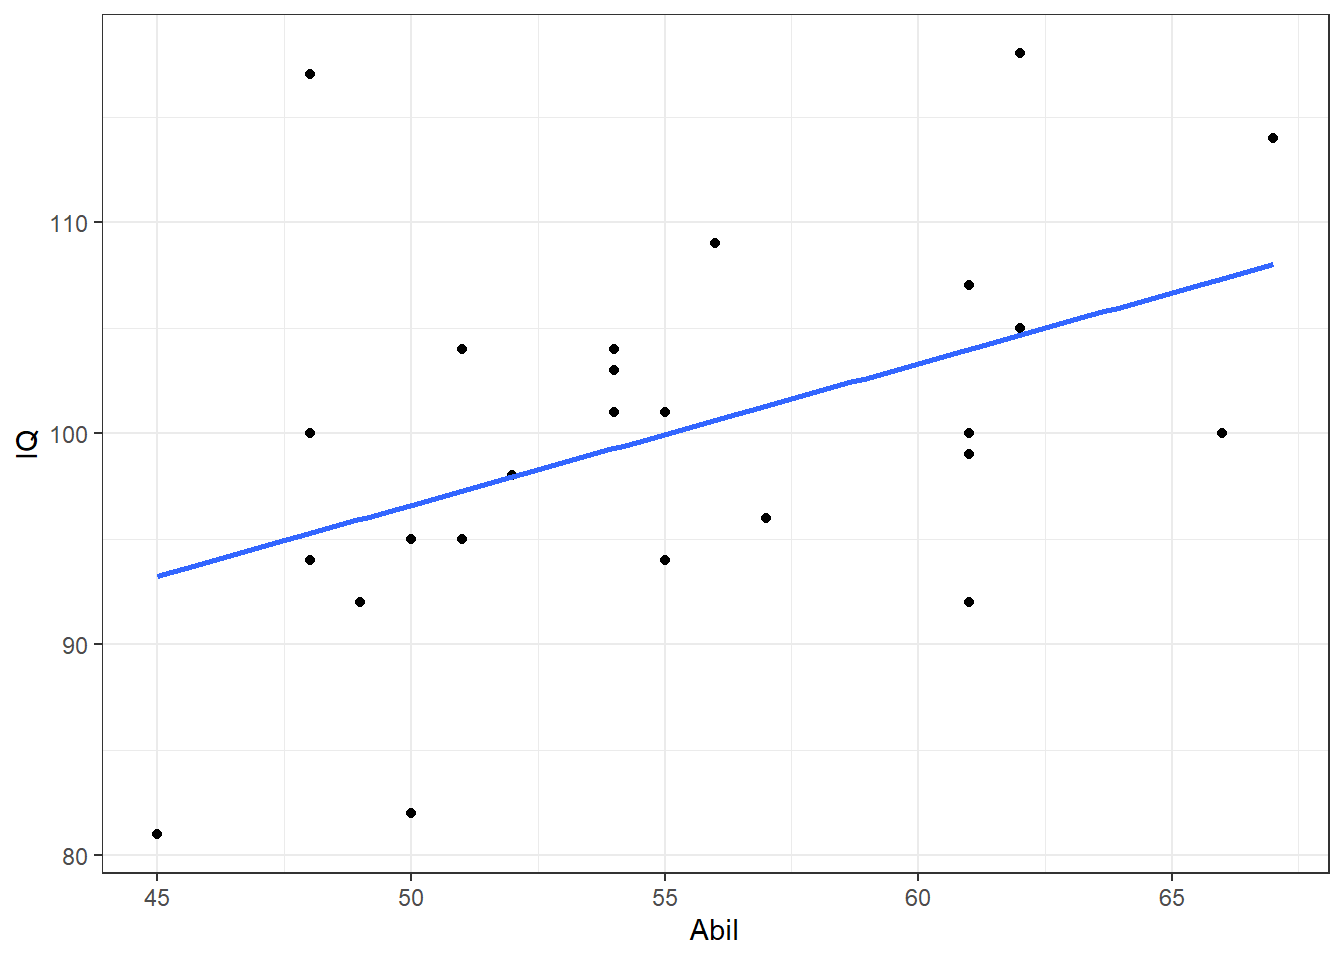 Scatterplot of IQ scores as a function of Reading Ability from Miller and Haden (2013) data